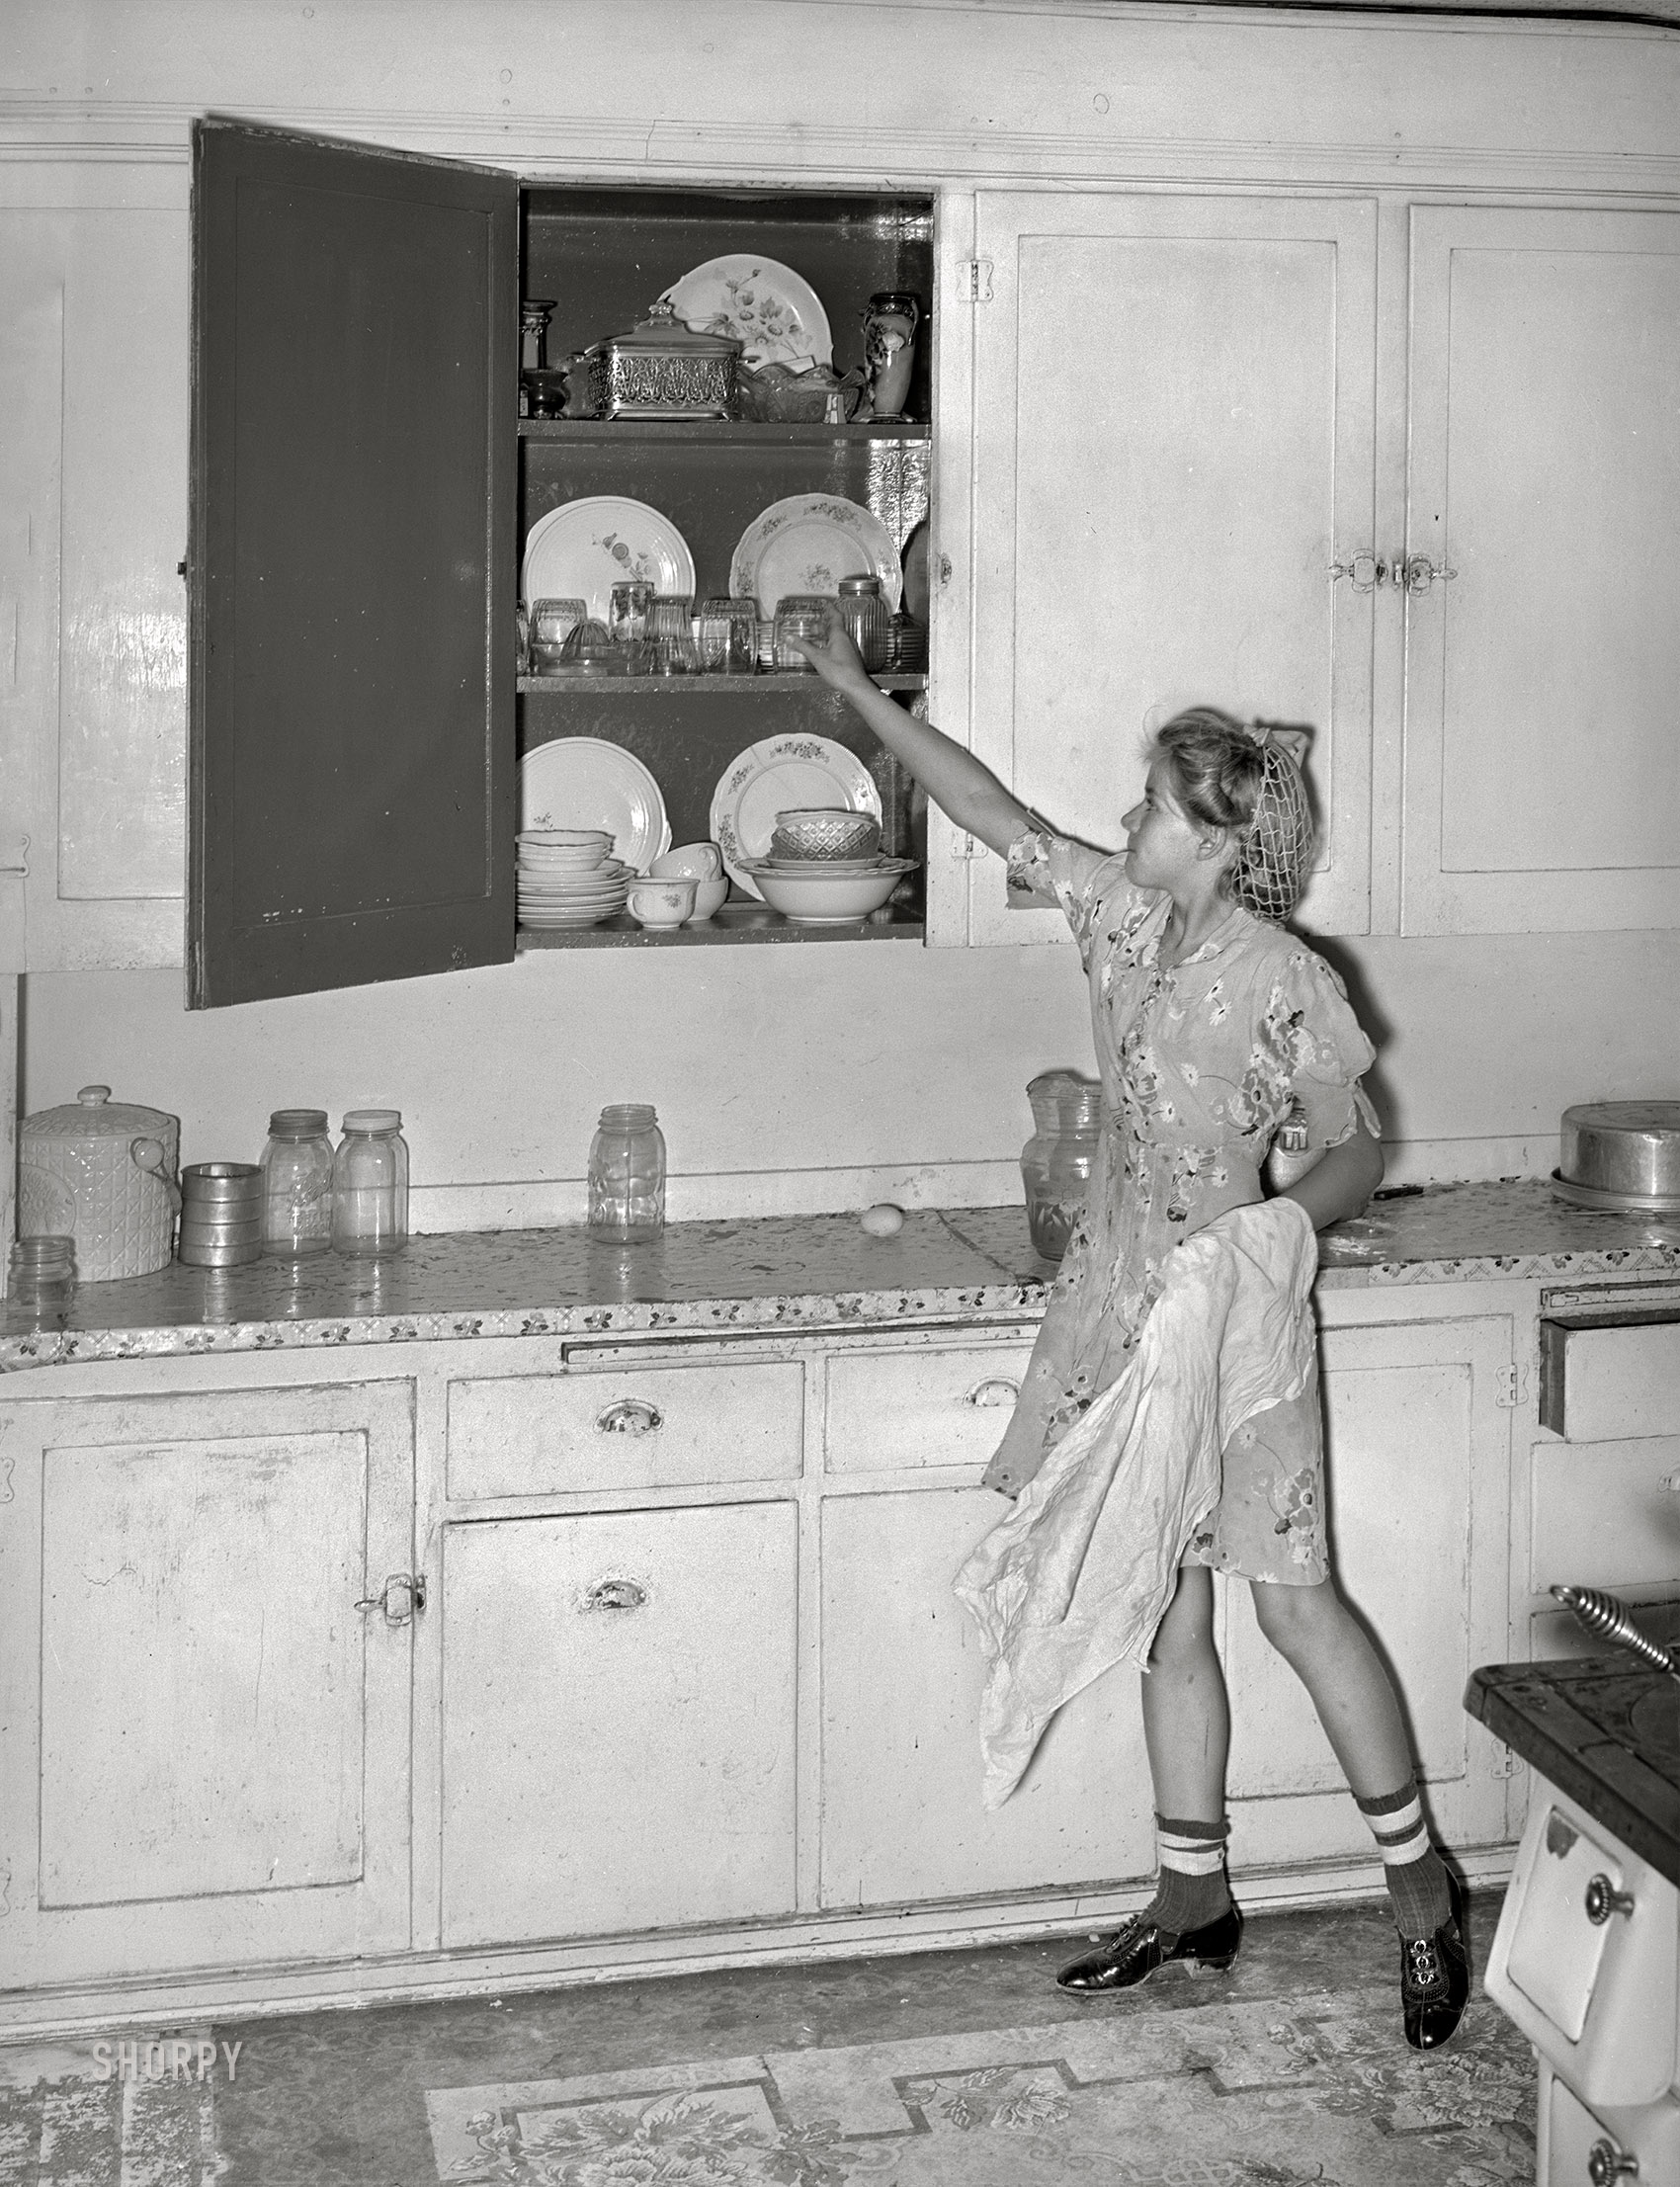 August 1940. "Daughter of Mormon farmer putting away dishes in kitchen cabinet. Box Elder County, Utah." Photo by Russell Lee for the Farm Security Administration. View full size.